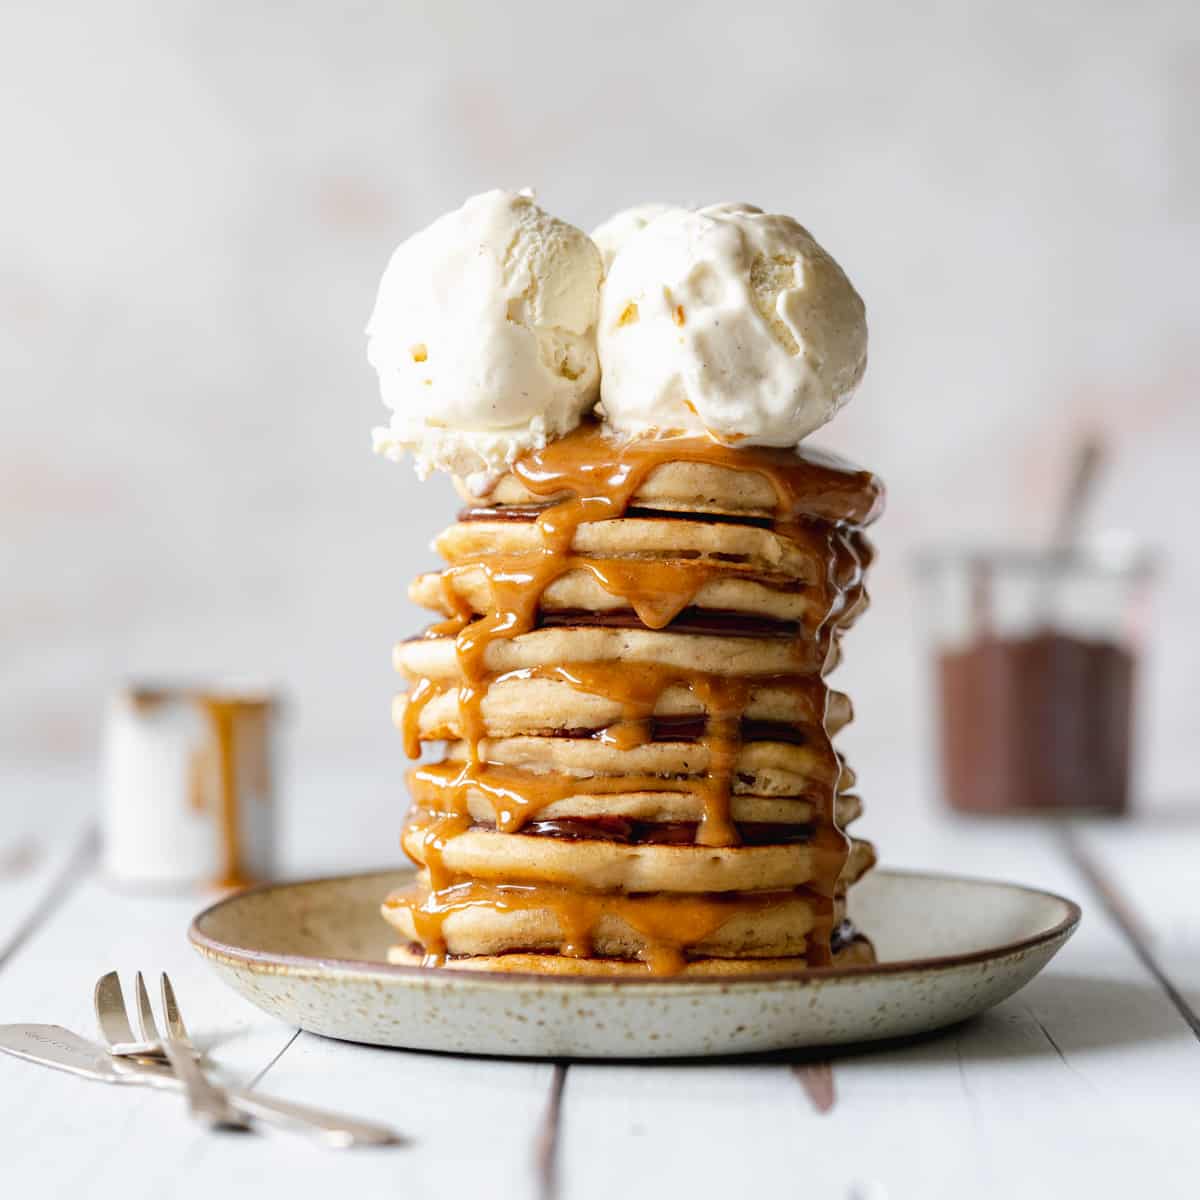 stack of pancakes with 2 scoops of ice cream with jug of caramel sauce.